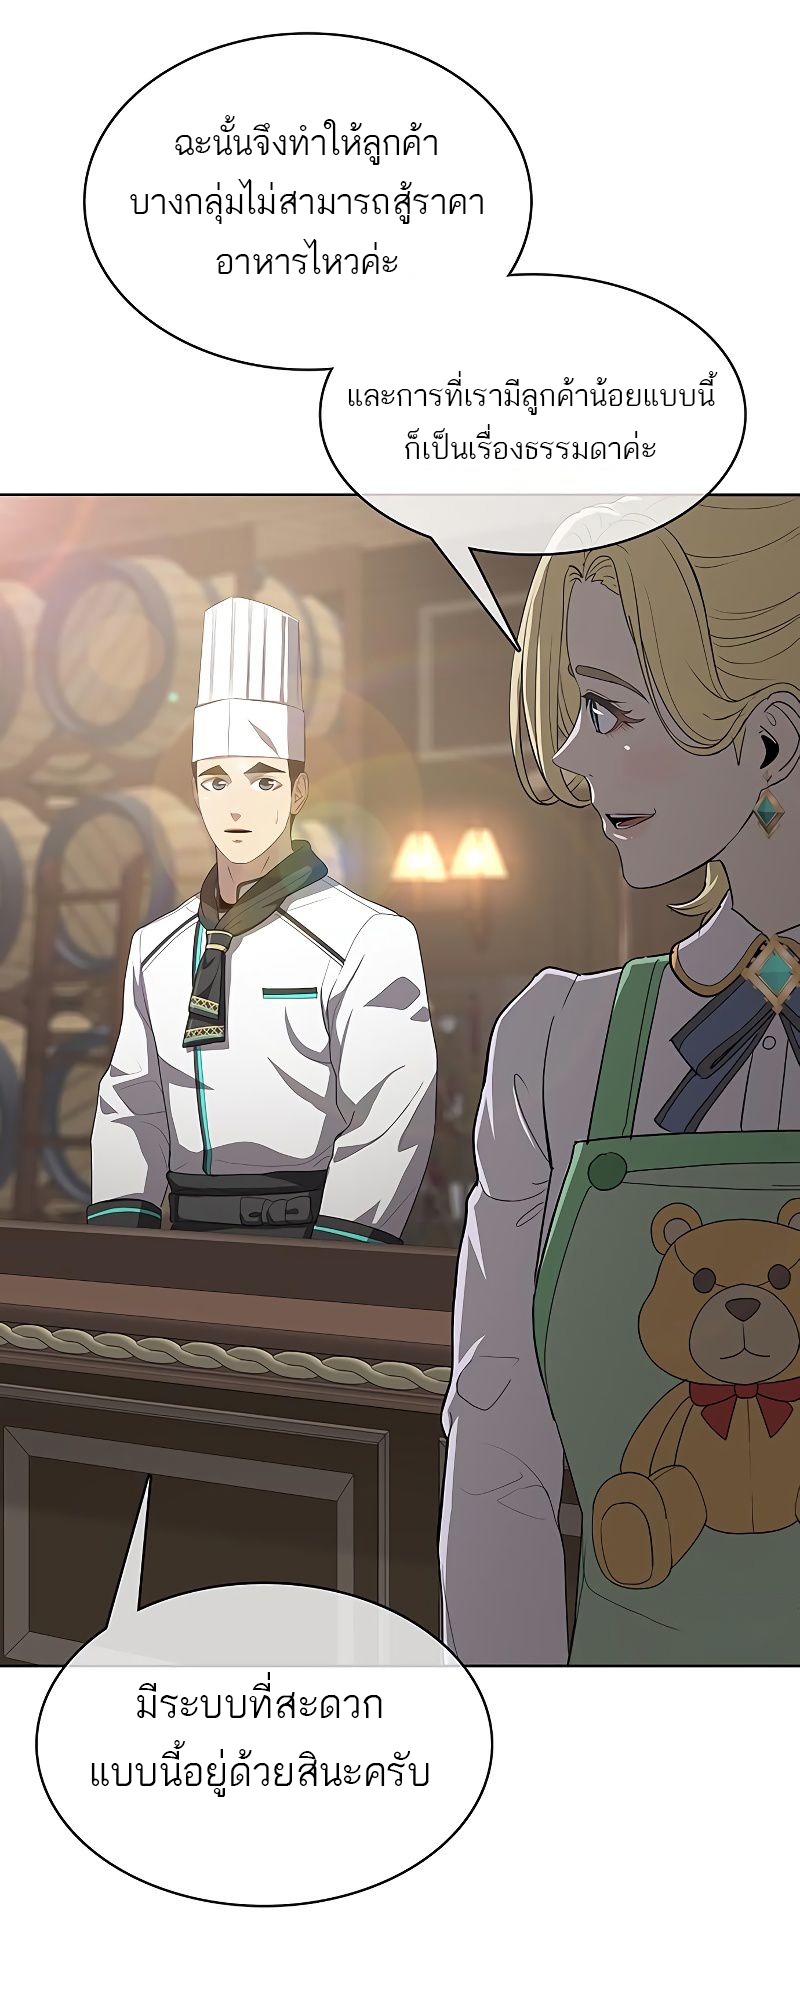 The Strongest Chef in Another World 12 16 04 25670037